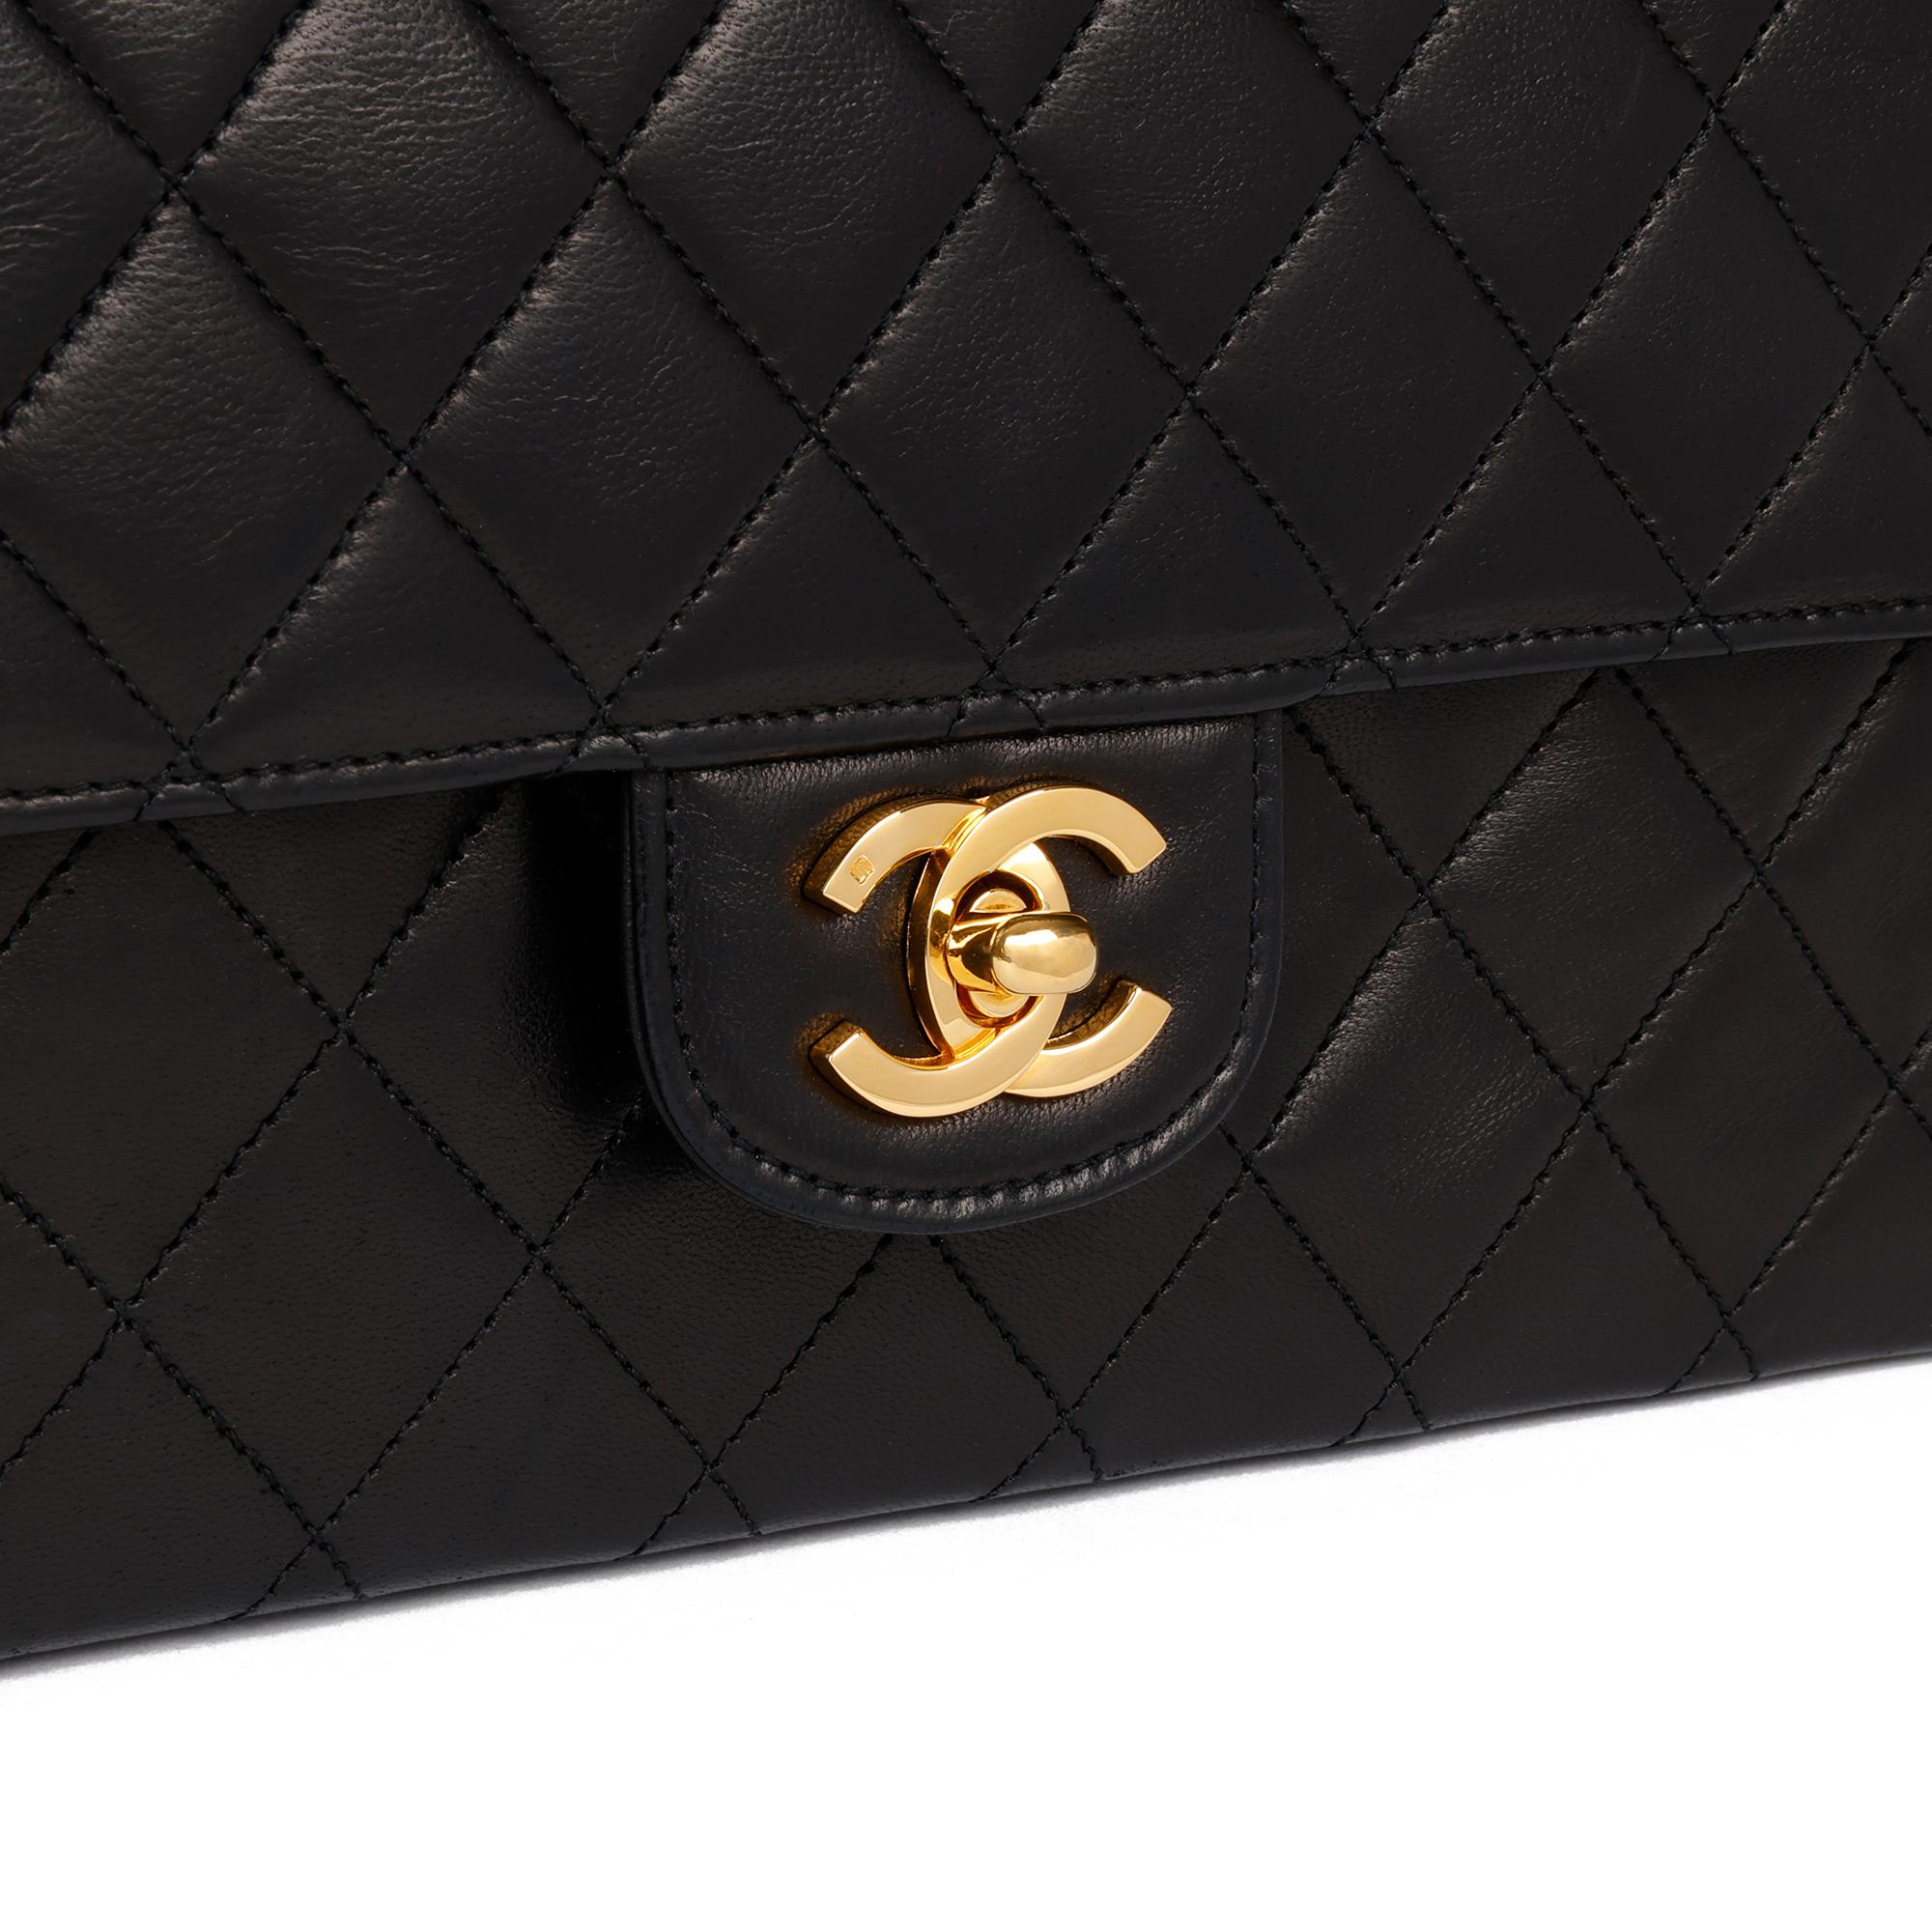 1999 Chanel Black Quilted Lambskin Leather Vintage Classic Double Flap Bag 2